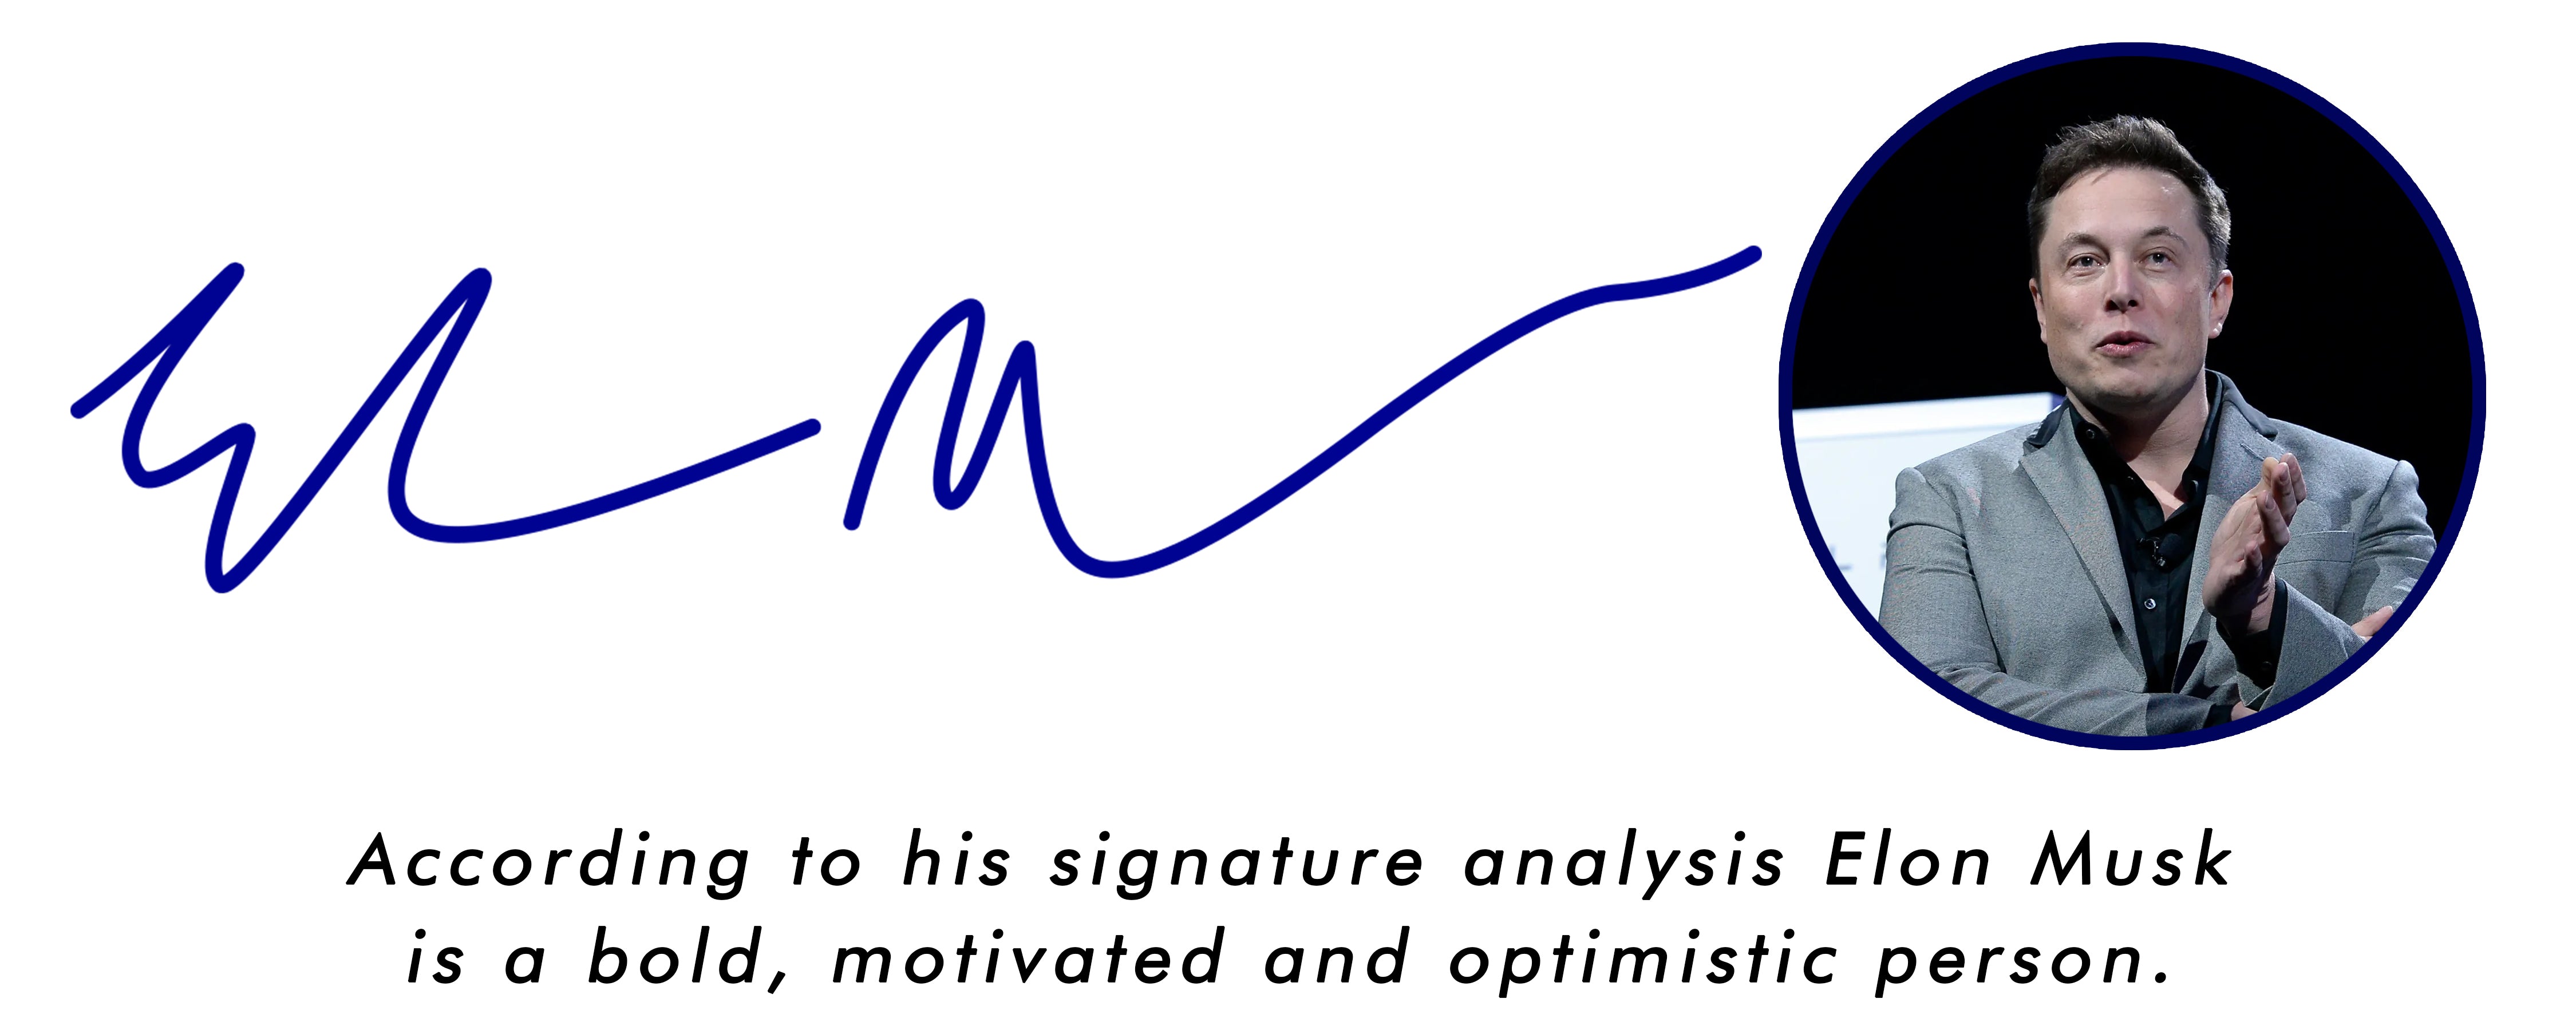 According to his signature analysis Elon Musk is a bold, motivated and optimistic person